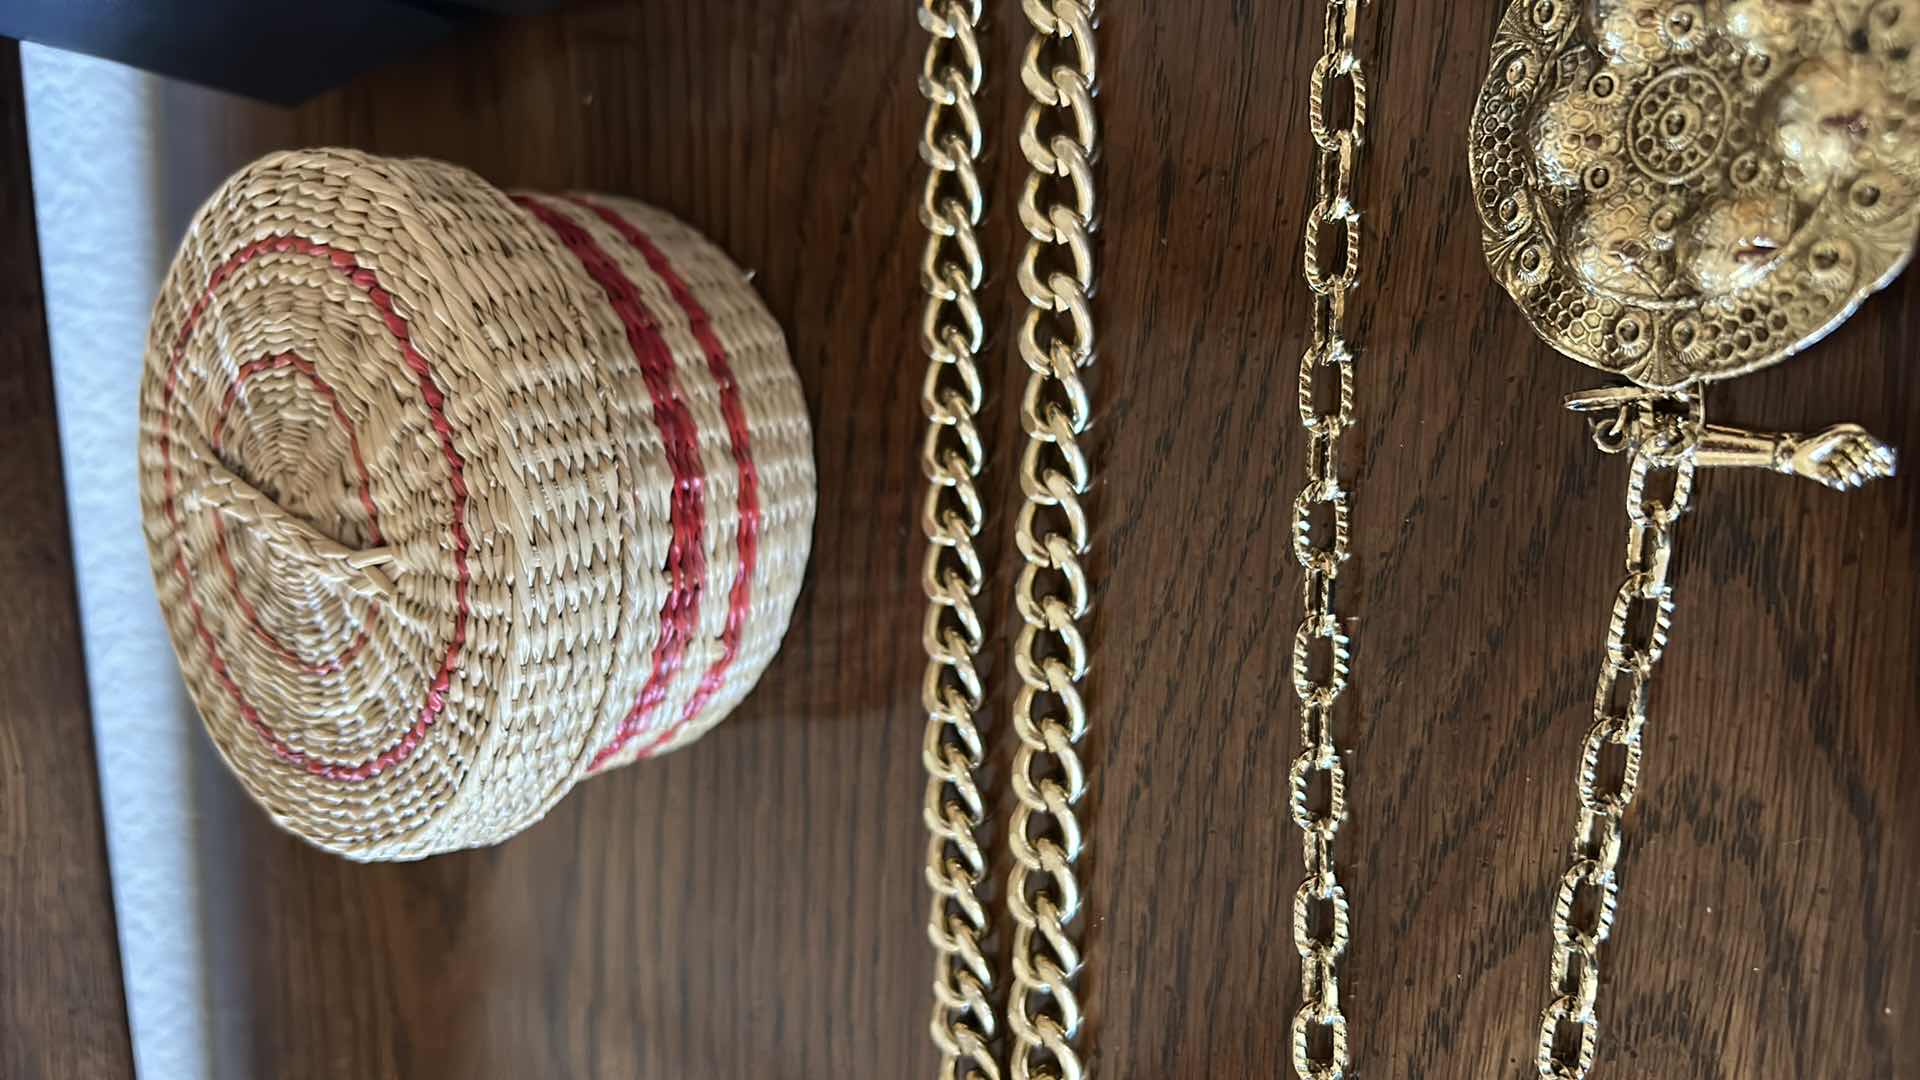 Photo 4 of Three gold chain belts, a collection of bracelets and wicker basket